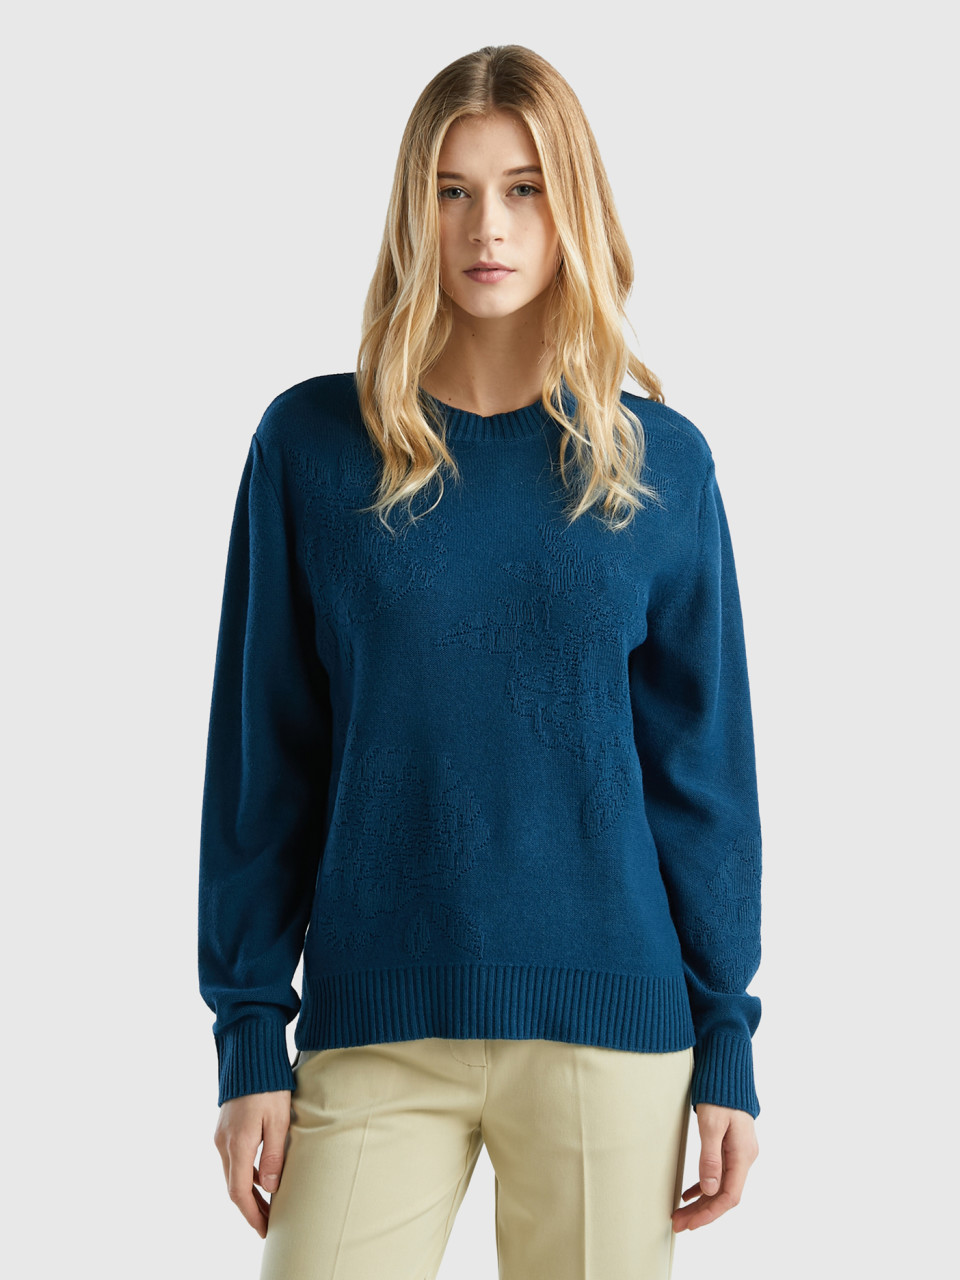 Benetton, Cashmere Blend Sweater With Floral Designs, Teal, Women